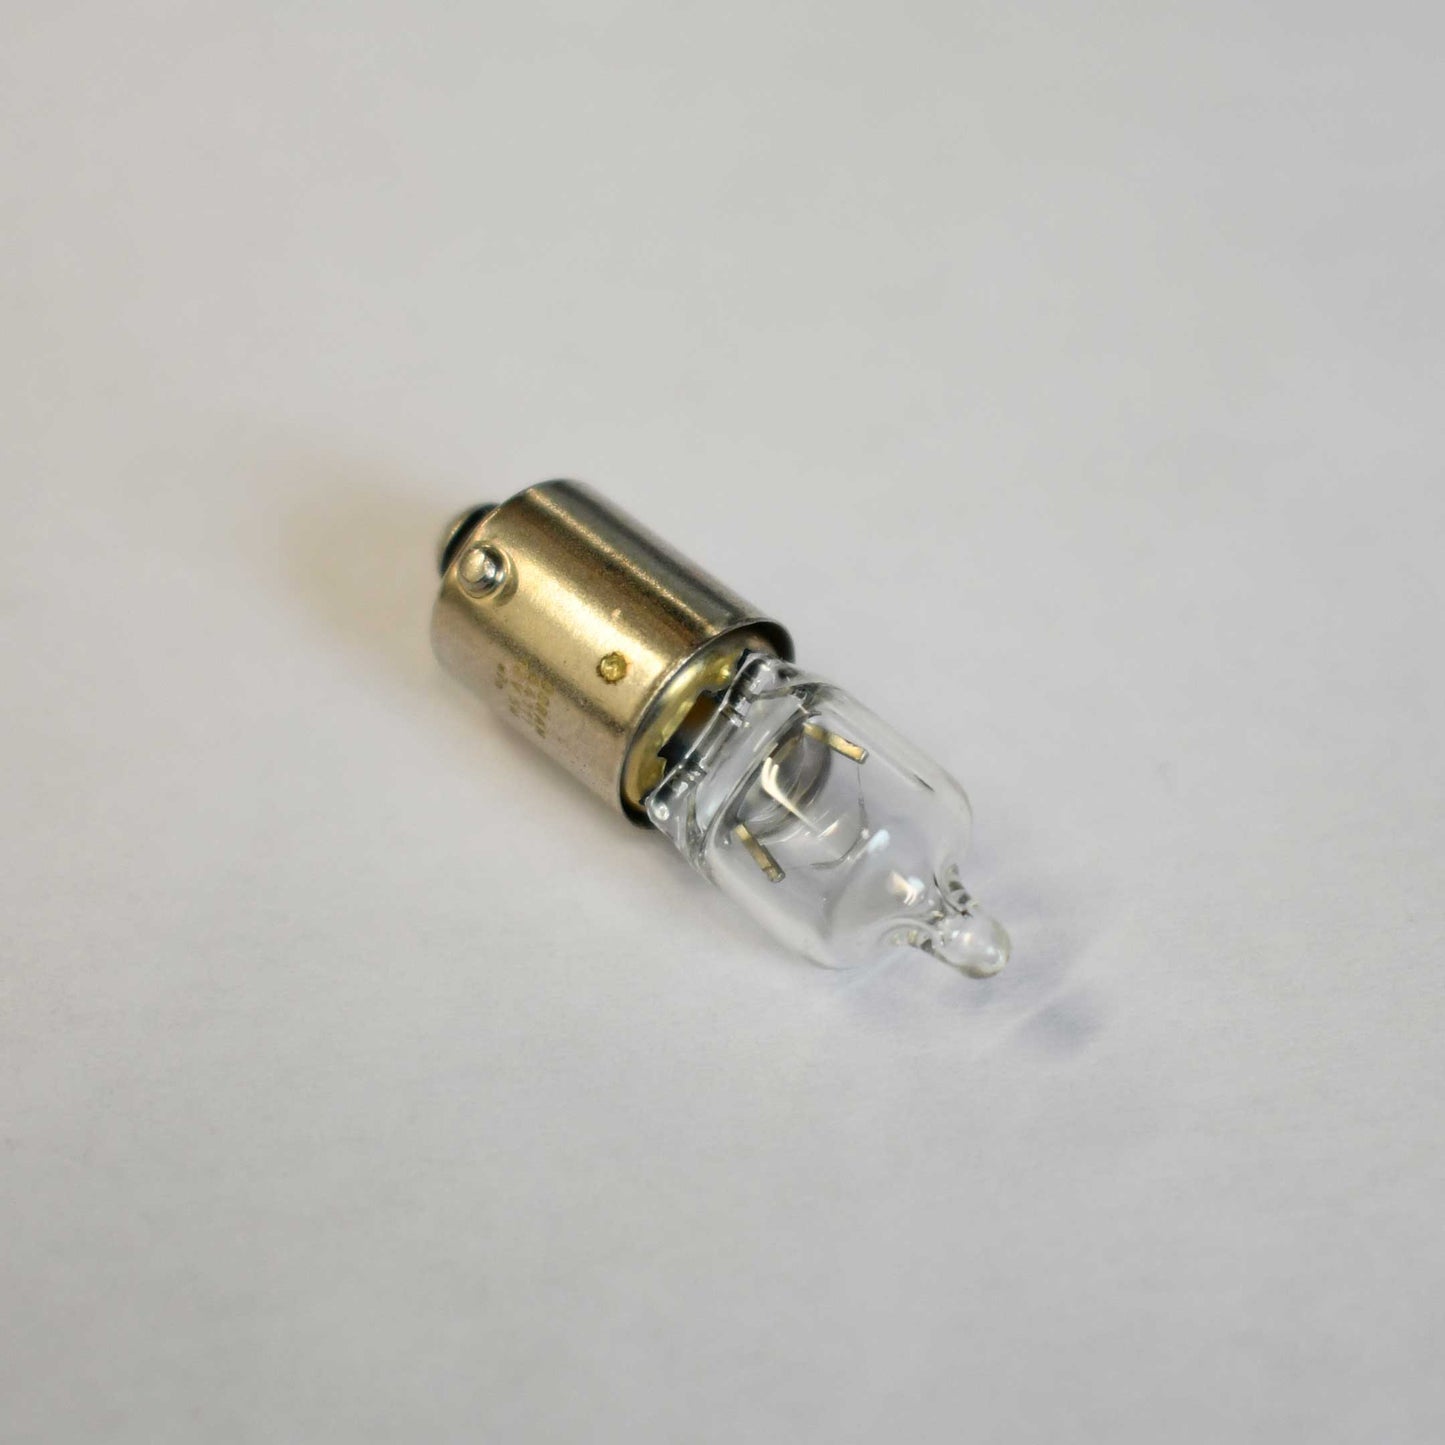 CTP - Mercedes R129 SL A124 Cabriolet - Replacement Dome Light Bulb